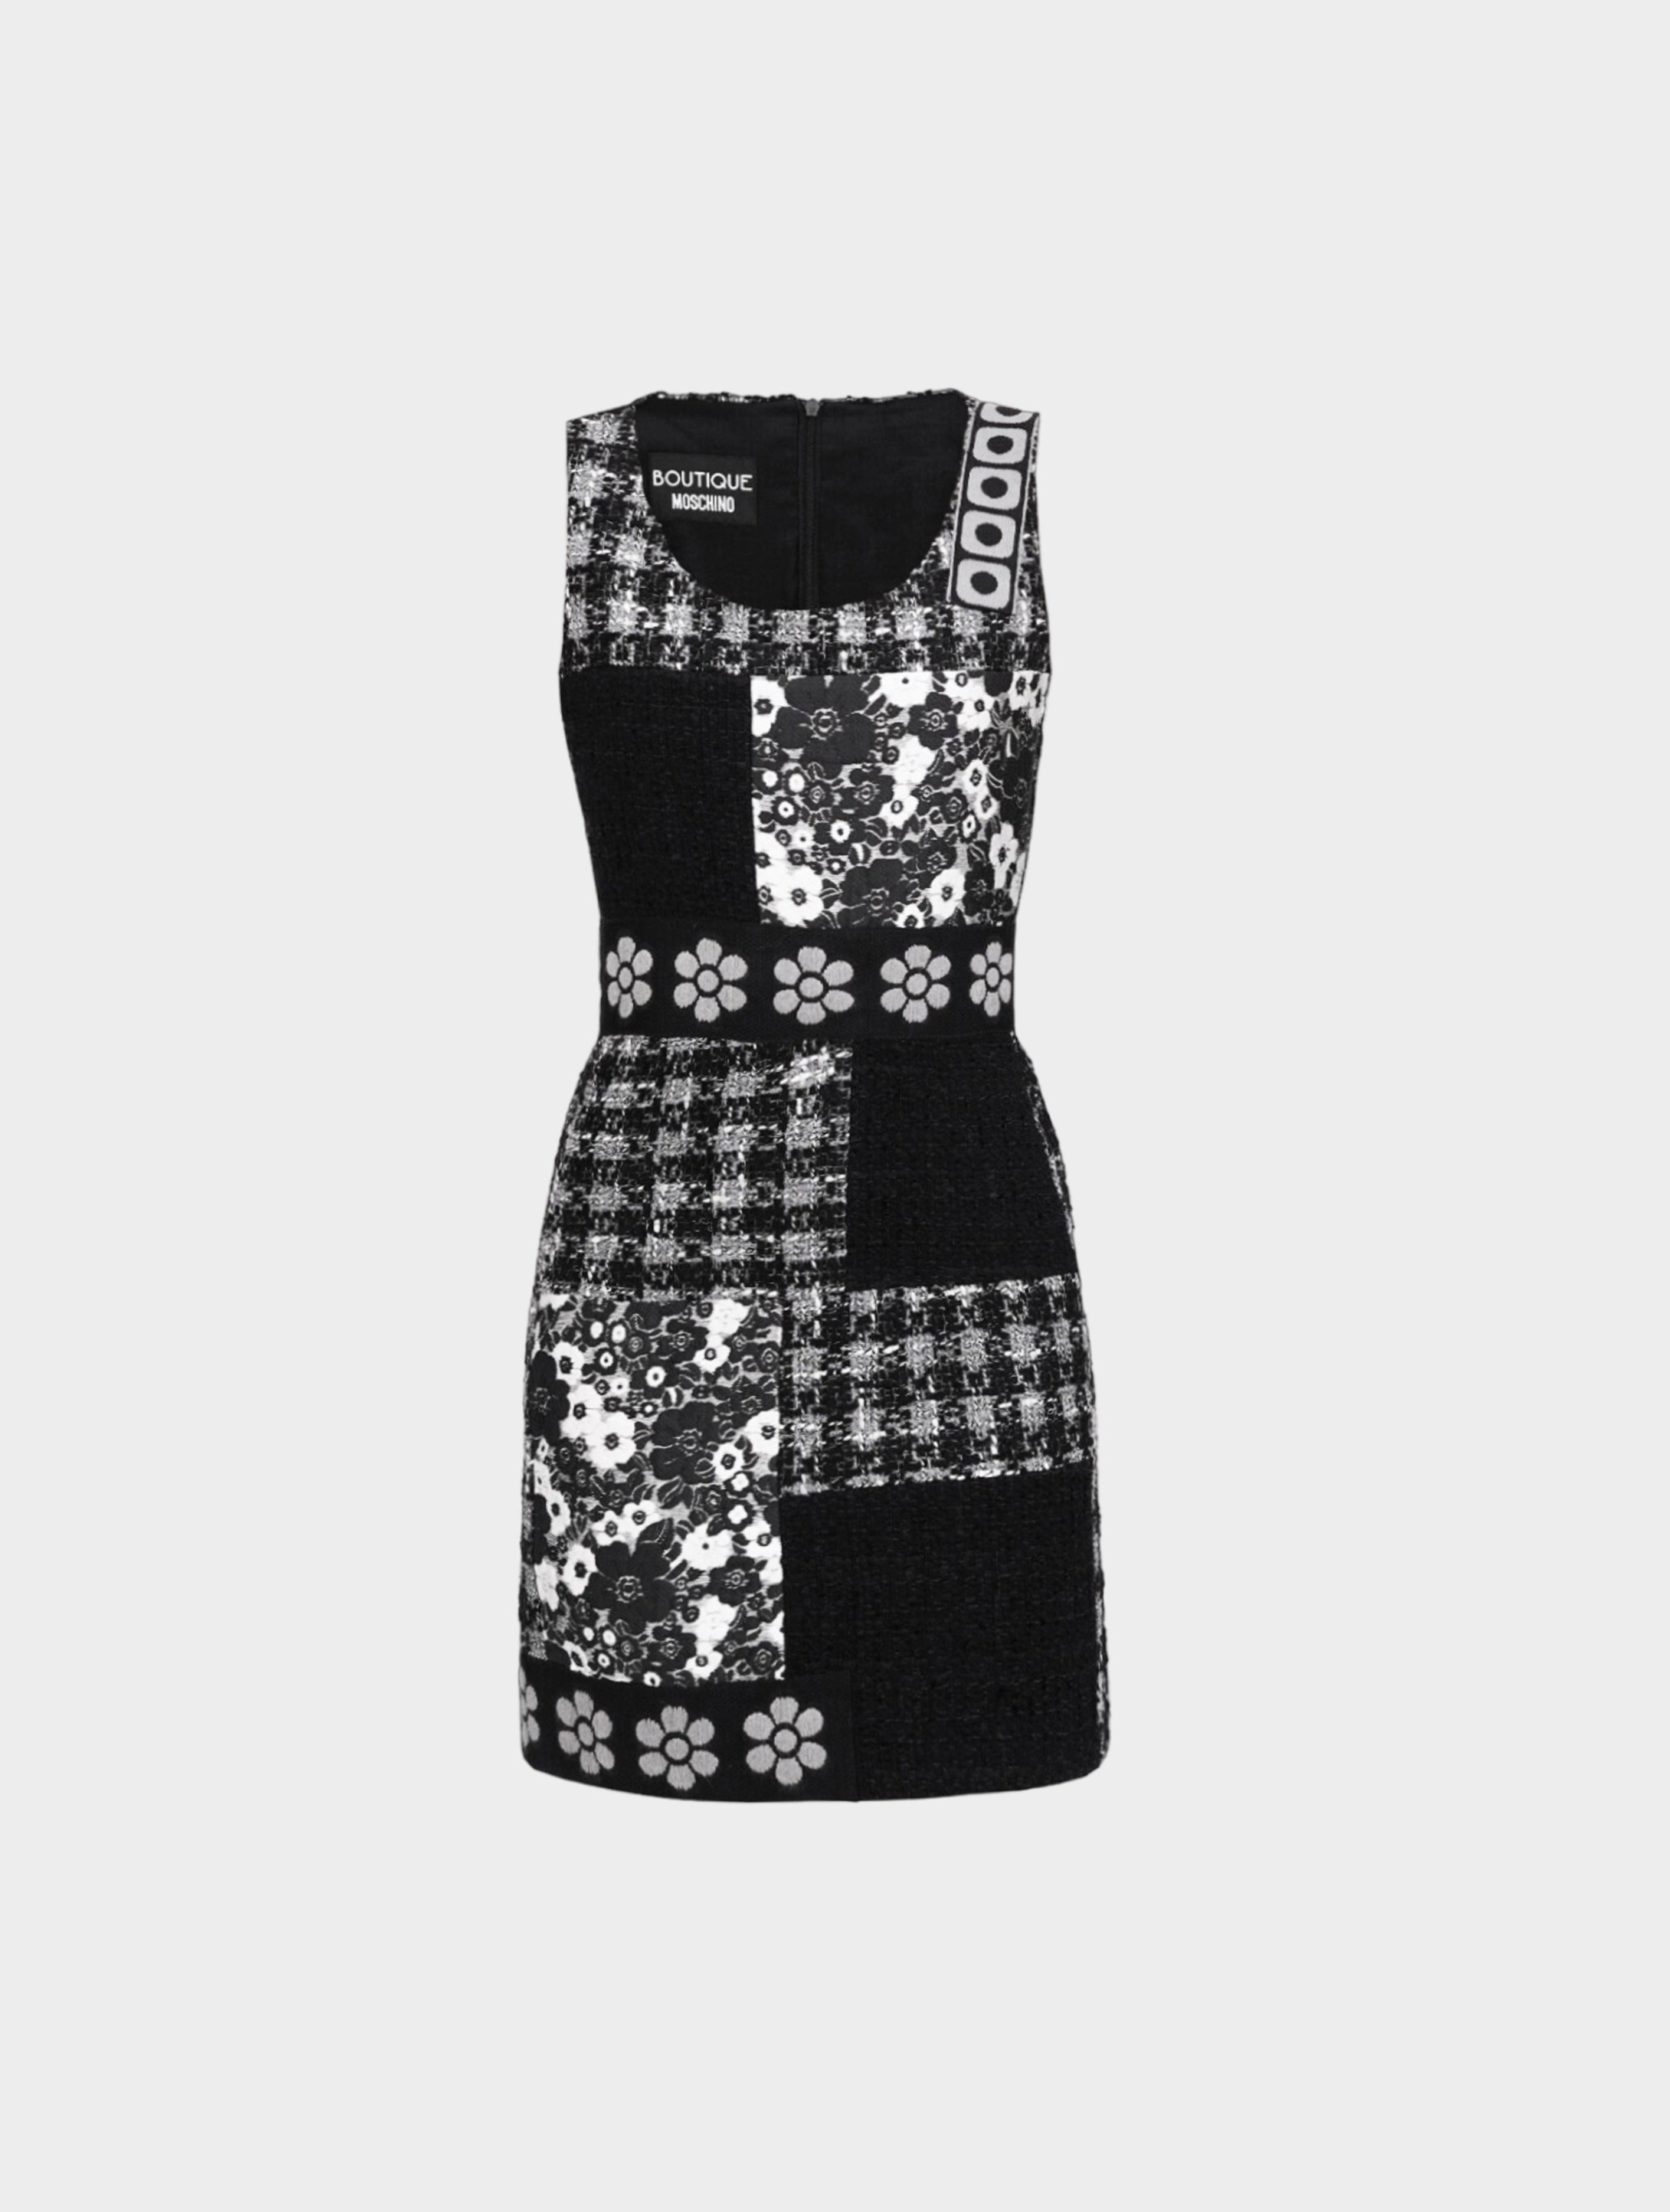 Moschino Boutique 2010s Black Tweed Floral Patchwork Dress